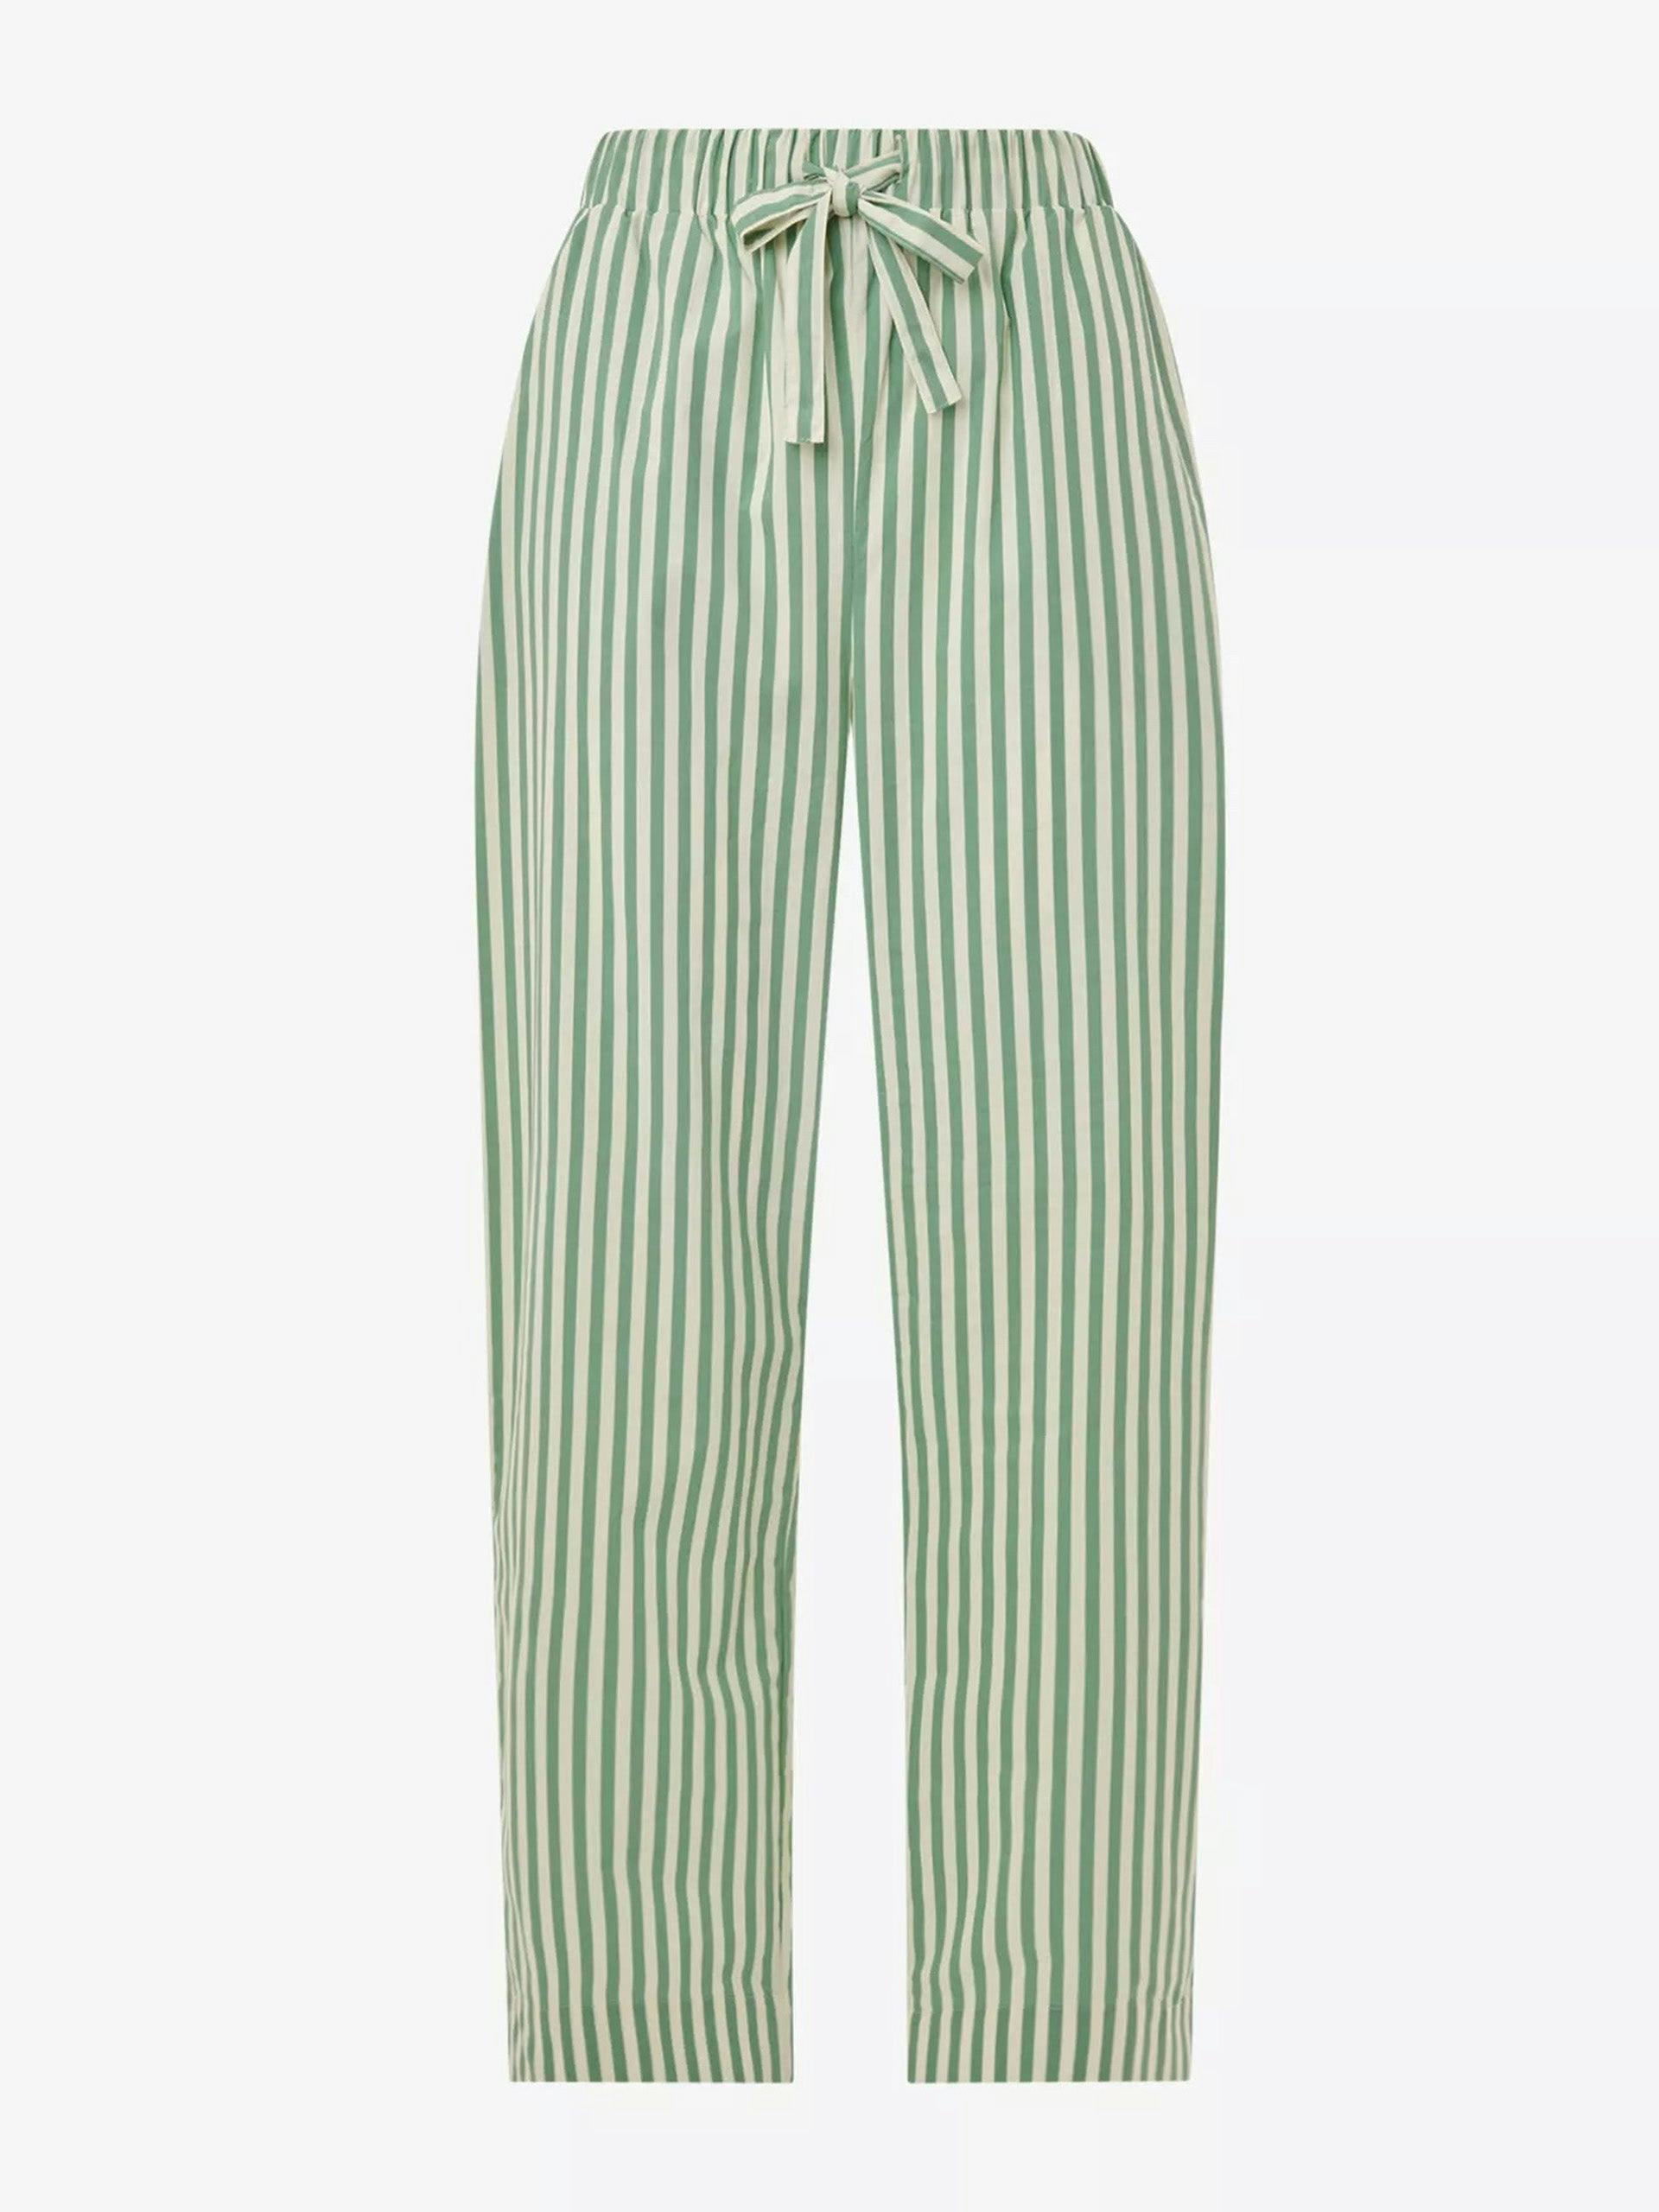 Stripe-print relaxed-fit cotton pyjama bottoms